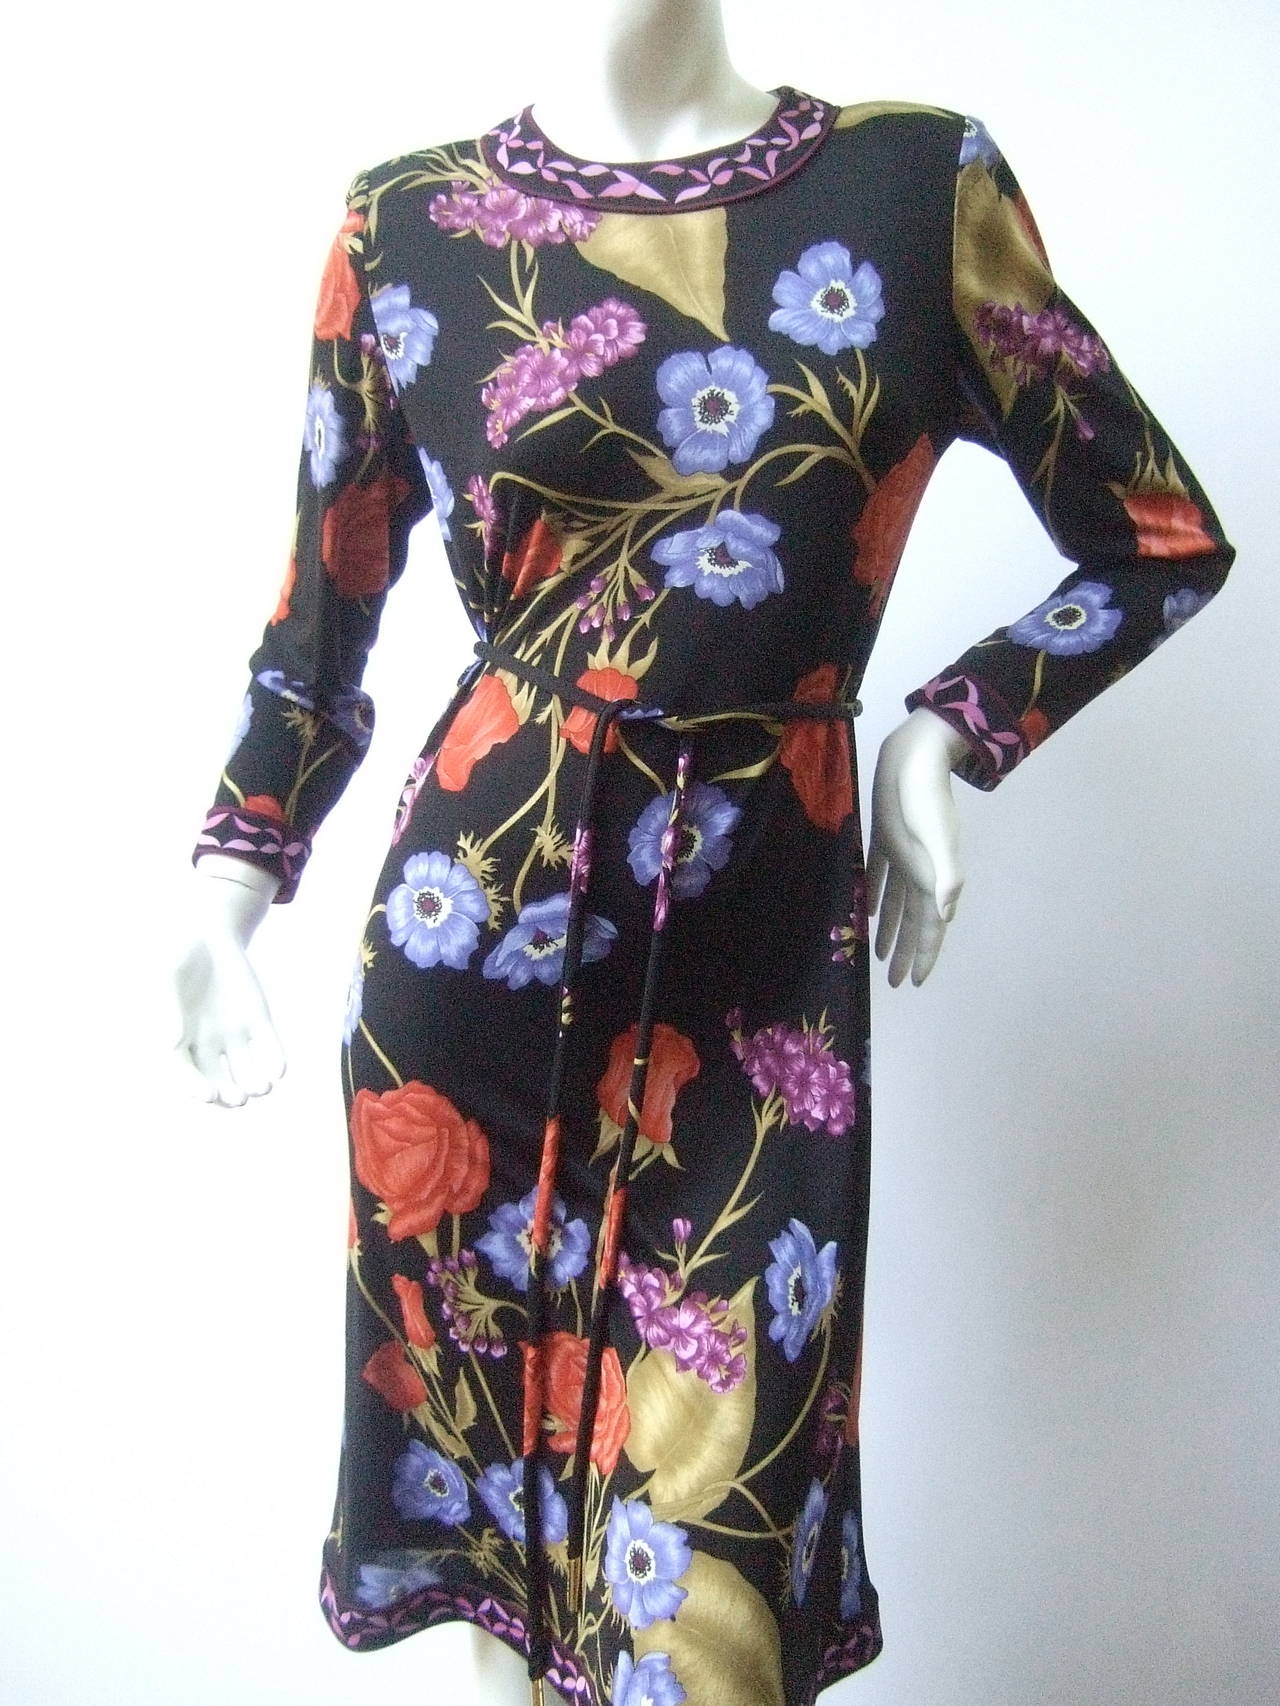 Averardo Bessi Silk Jersey Floral Print Dress Made in Italy US Size 4 2